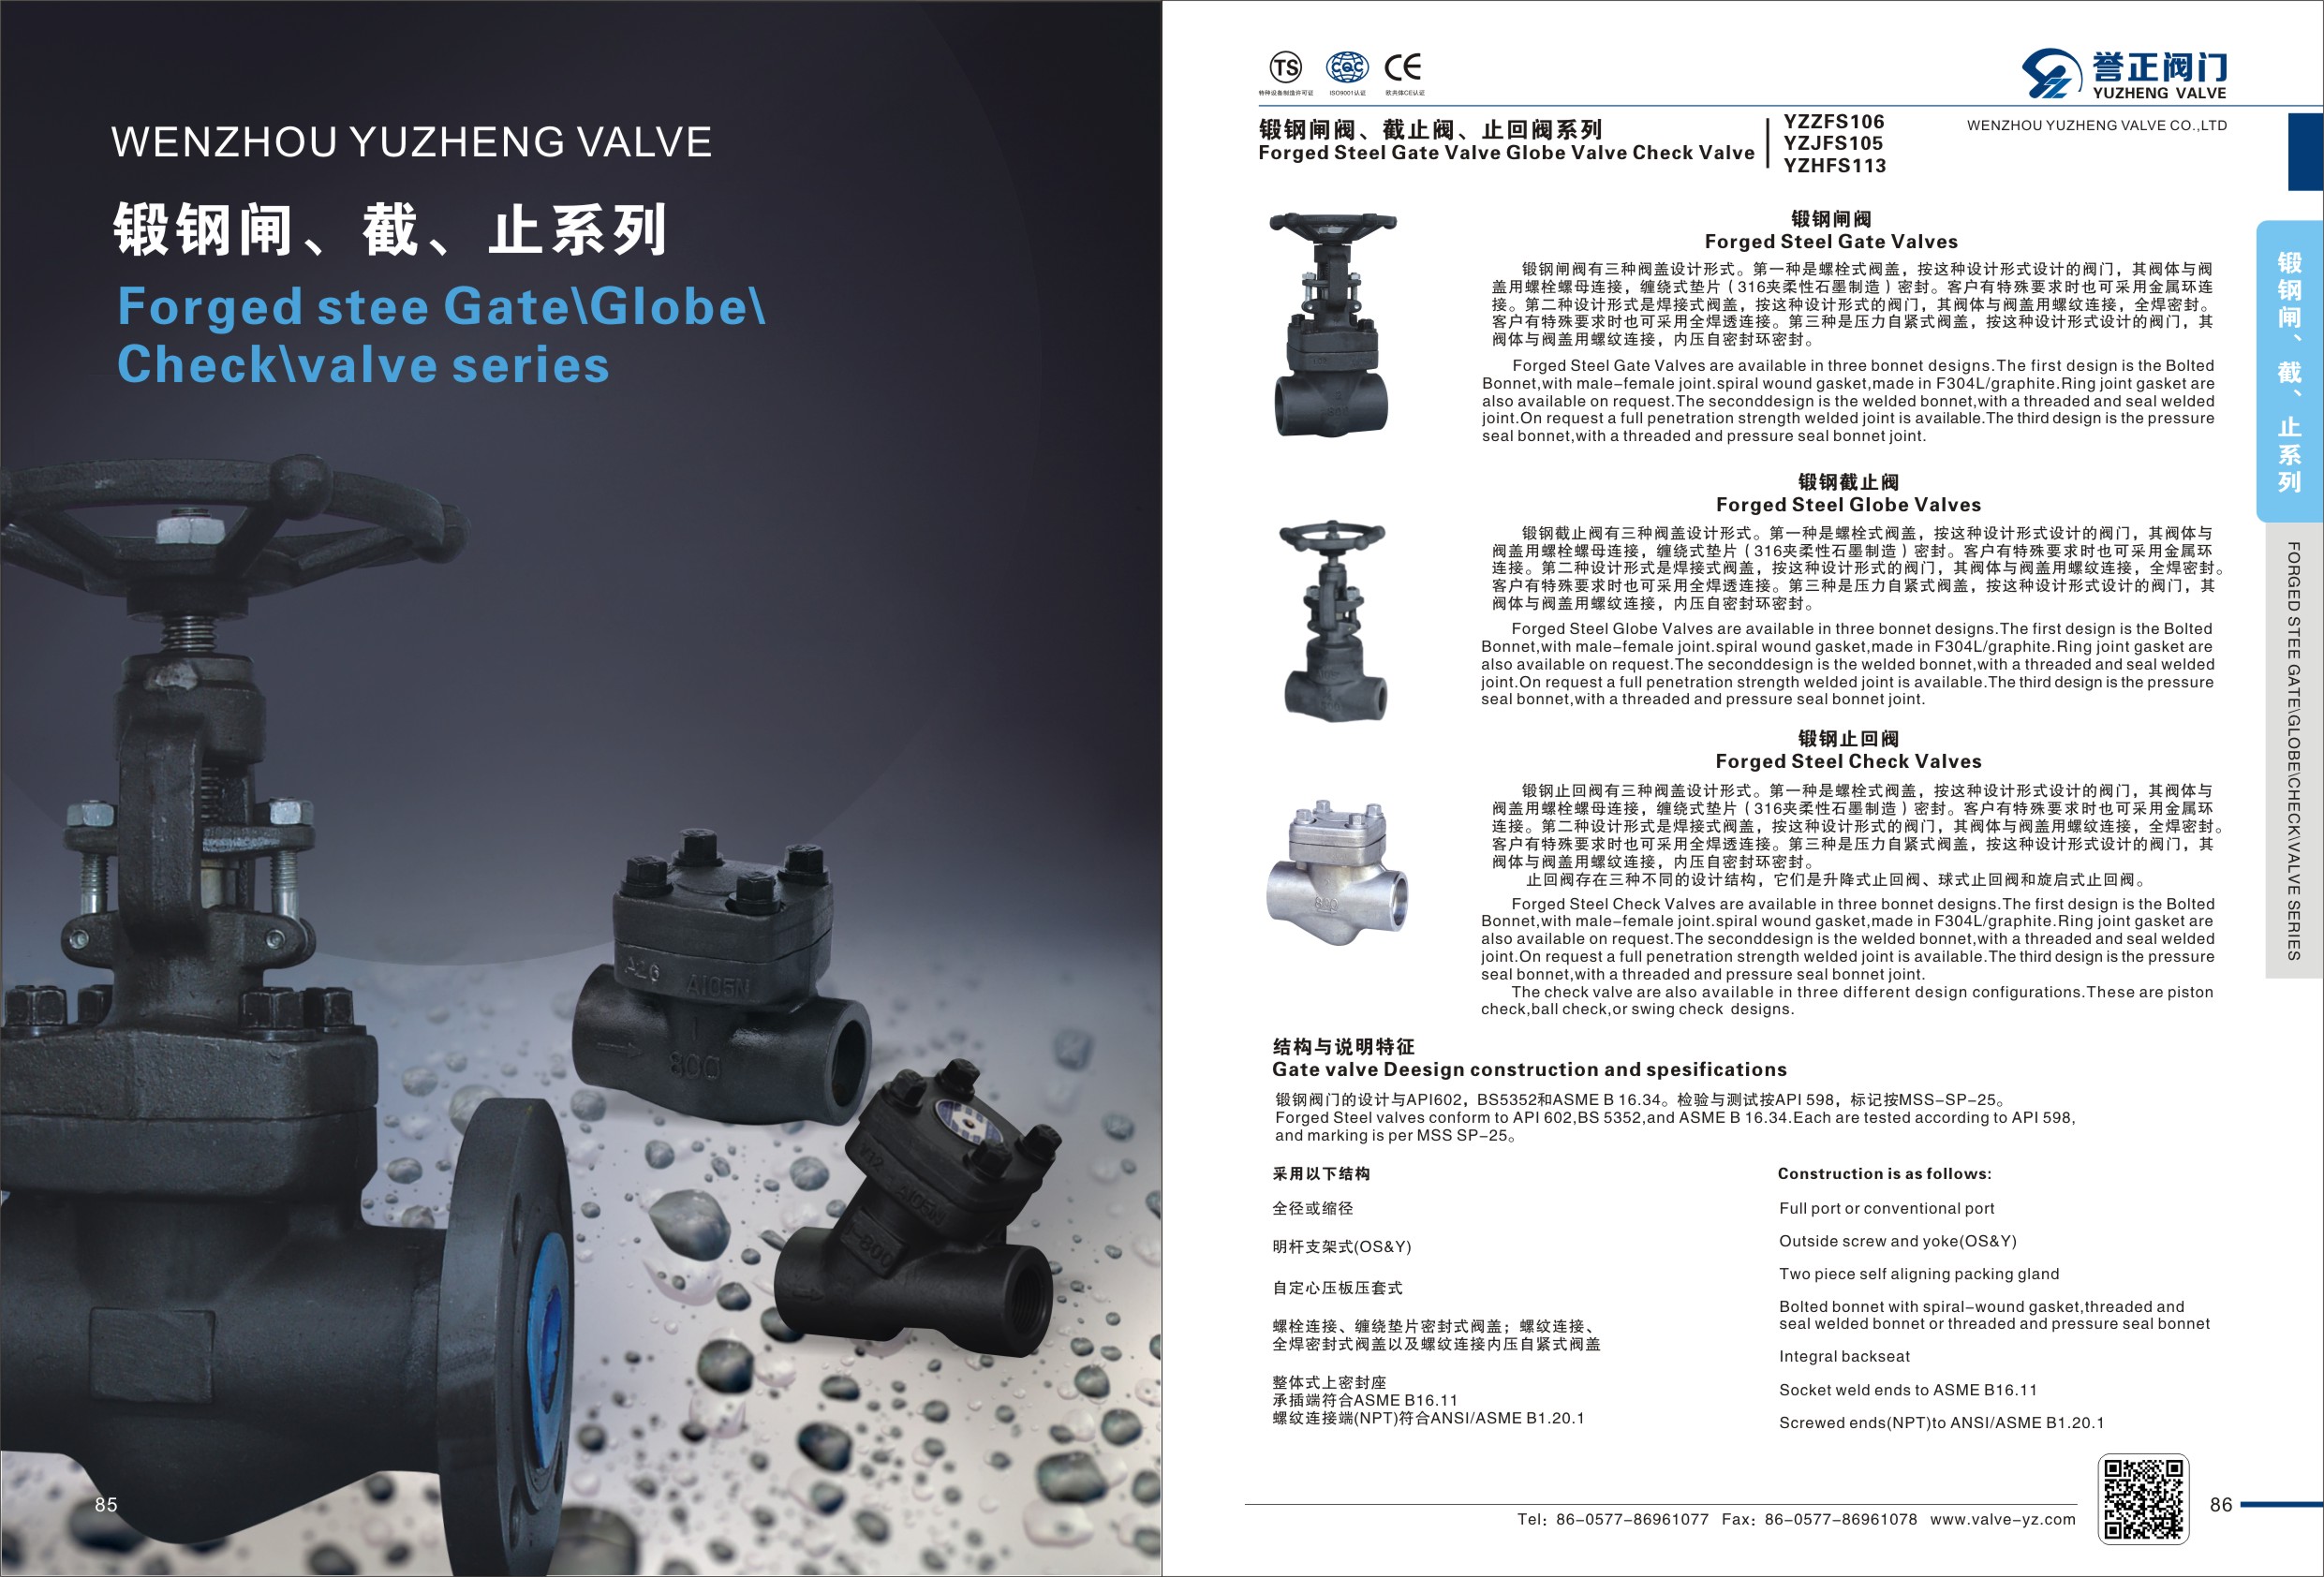 FORGED STEEL VALVE CATALOGUE